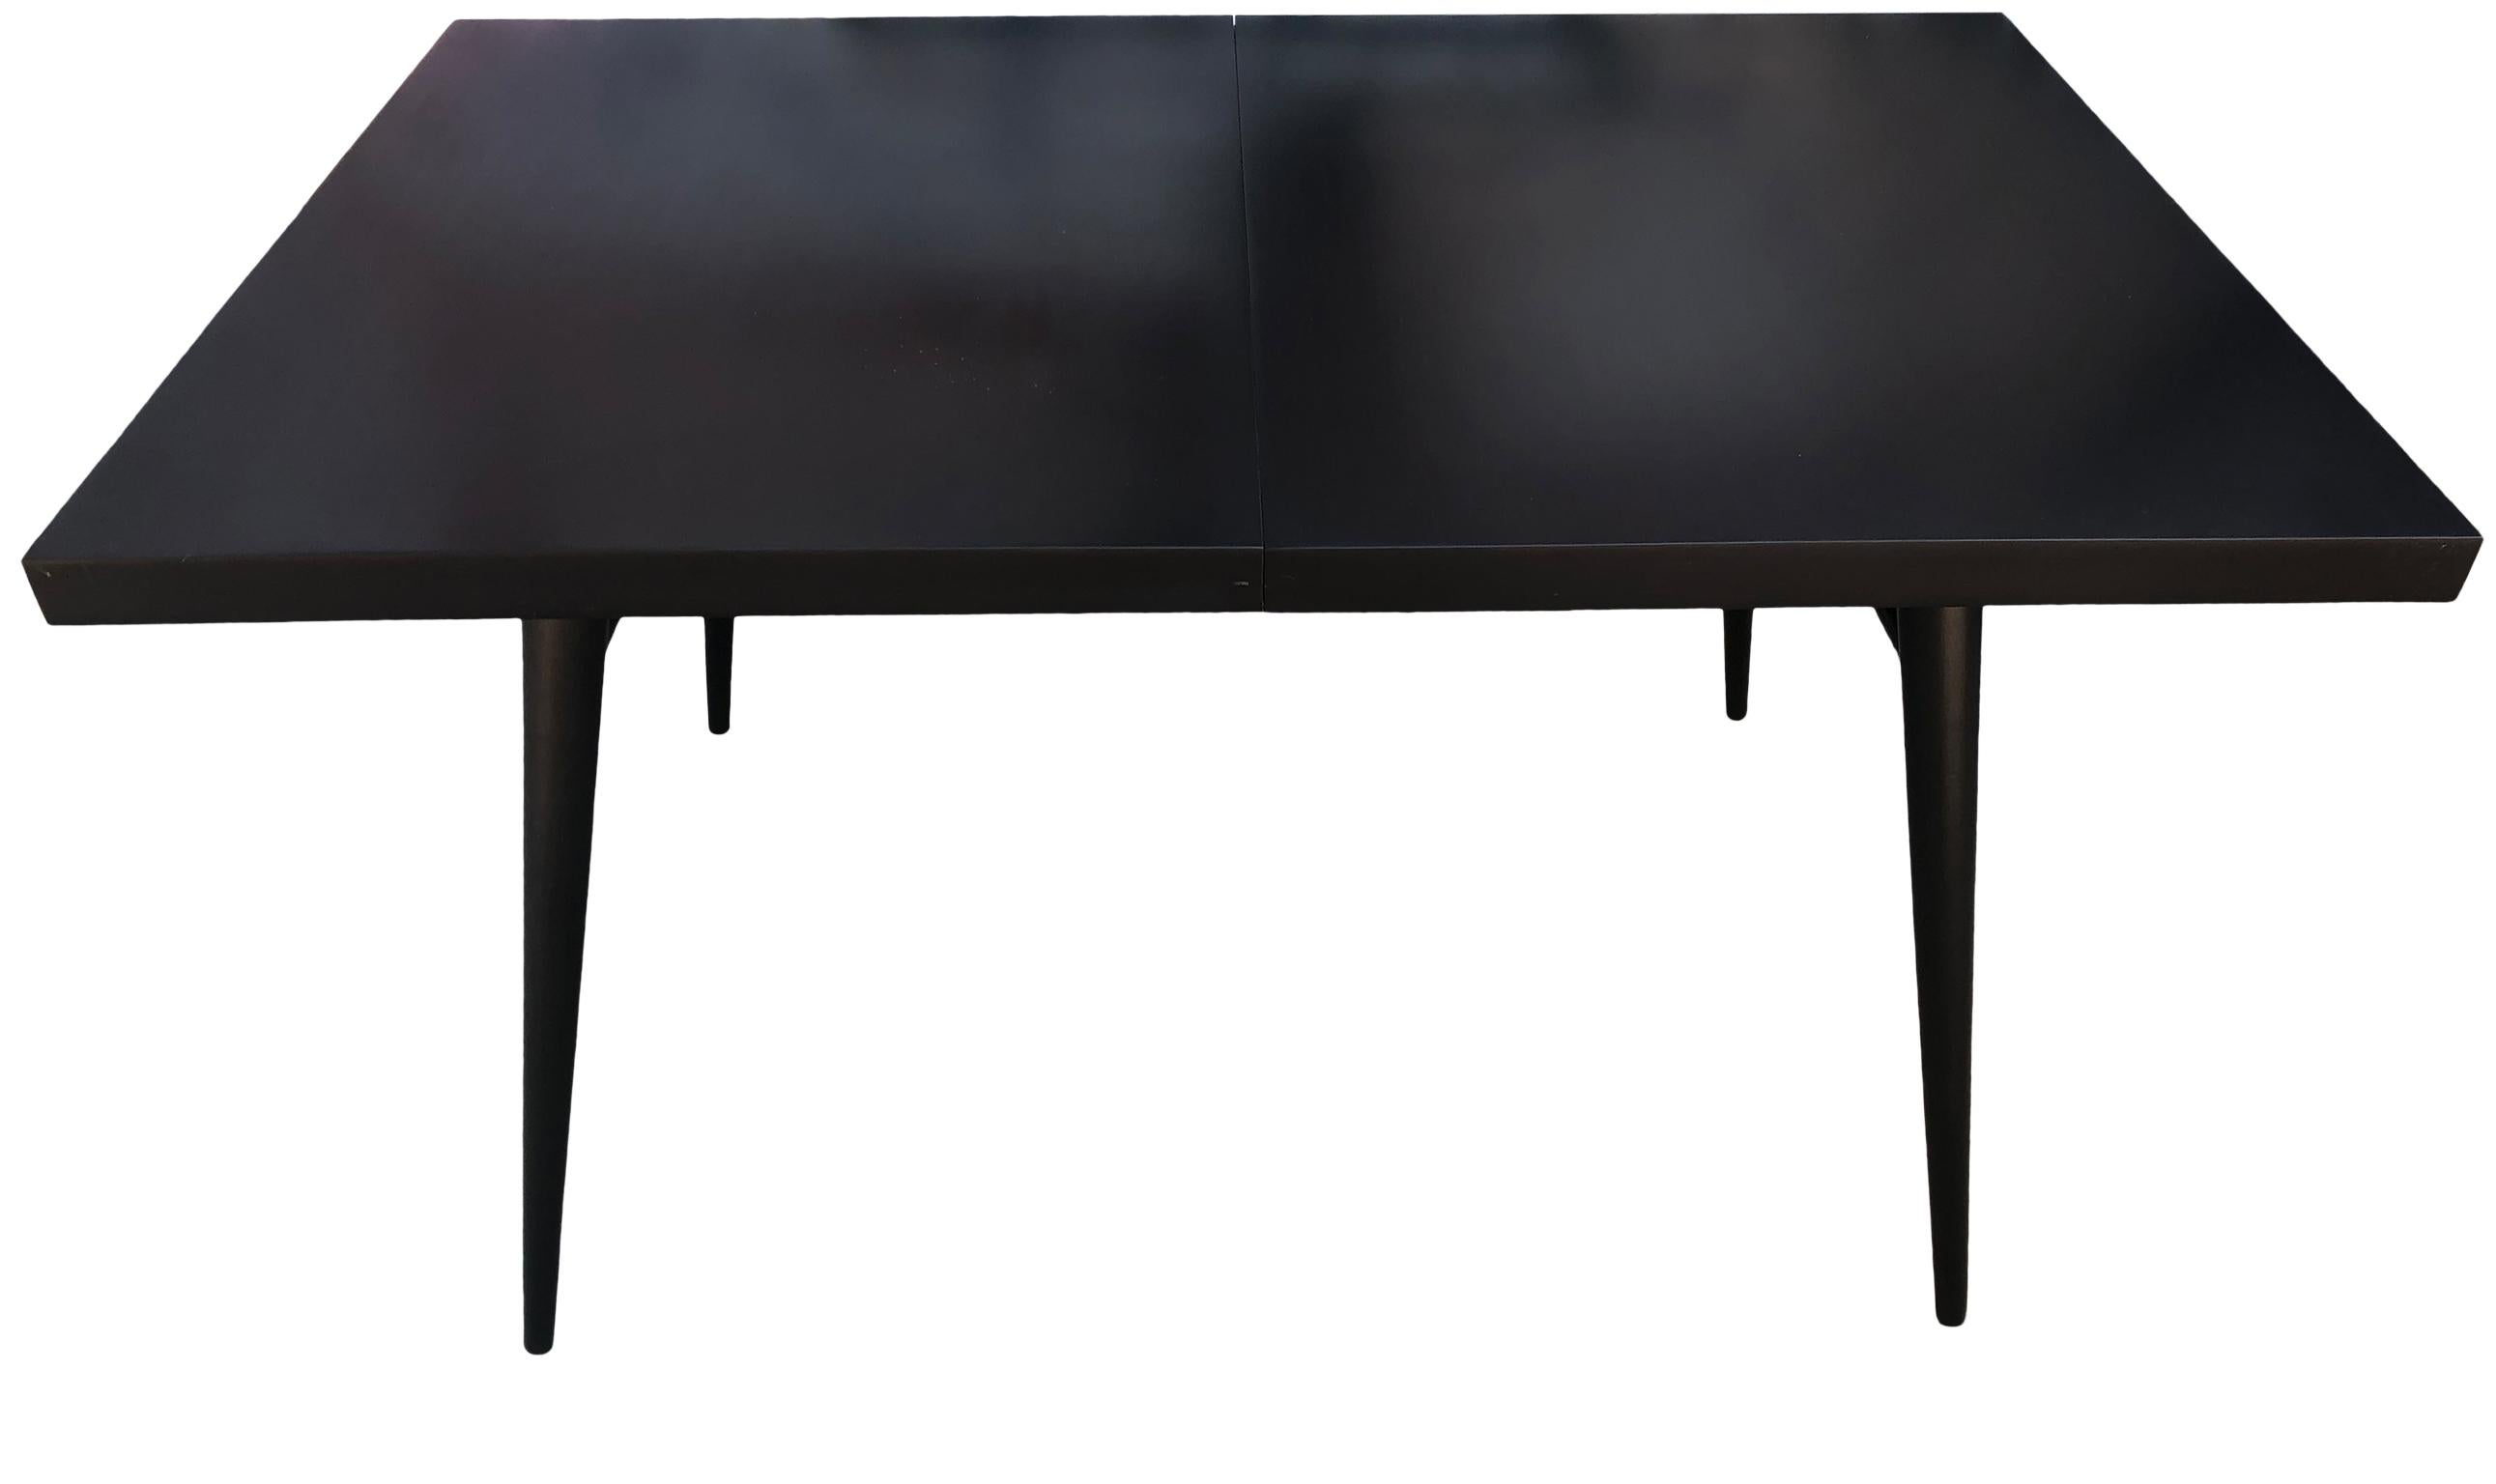 Beautiful early 1950s Paul McCobb maple dining table. Great midcentury design. Totally refinished dining table #1522 with 4 tapered legs with dowel supports. All solid maple with fresh black lacquer finish in excellent condition. You are buying (1)